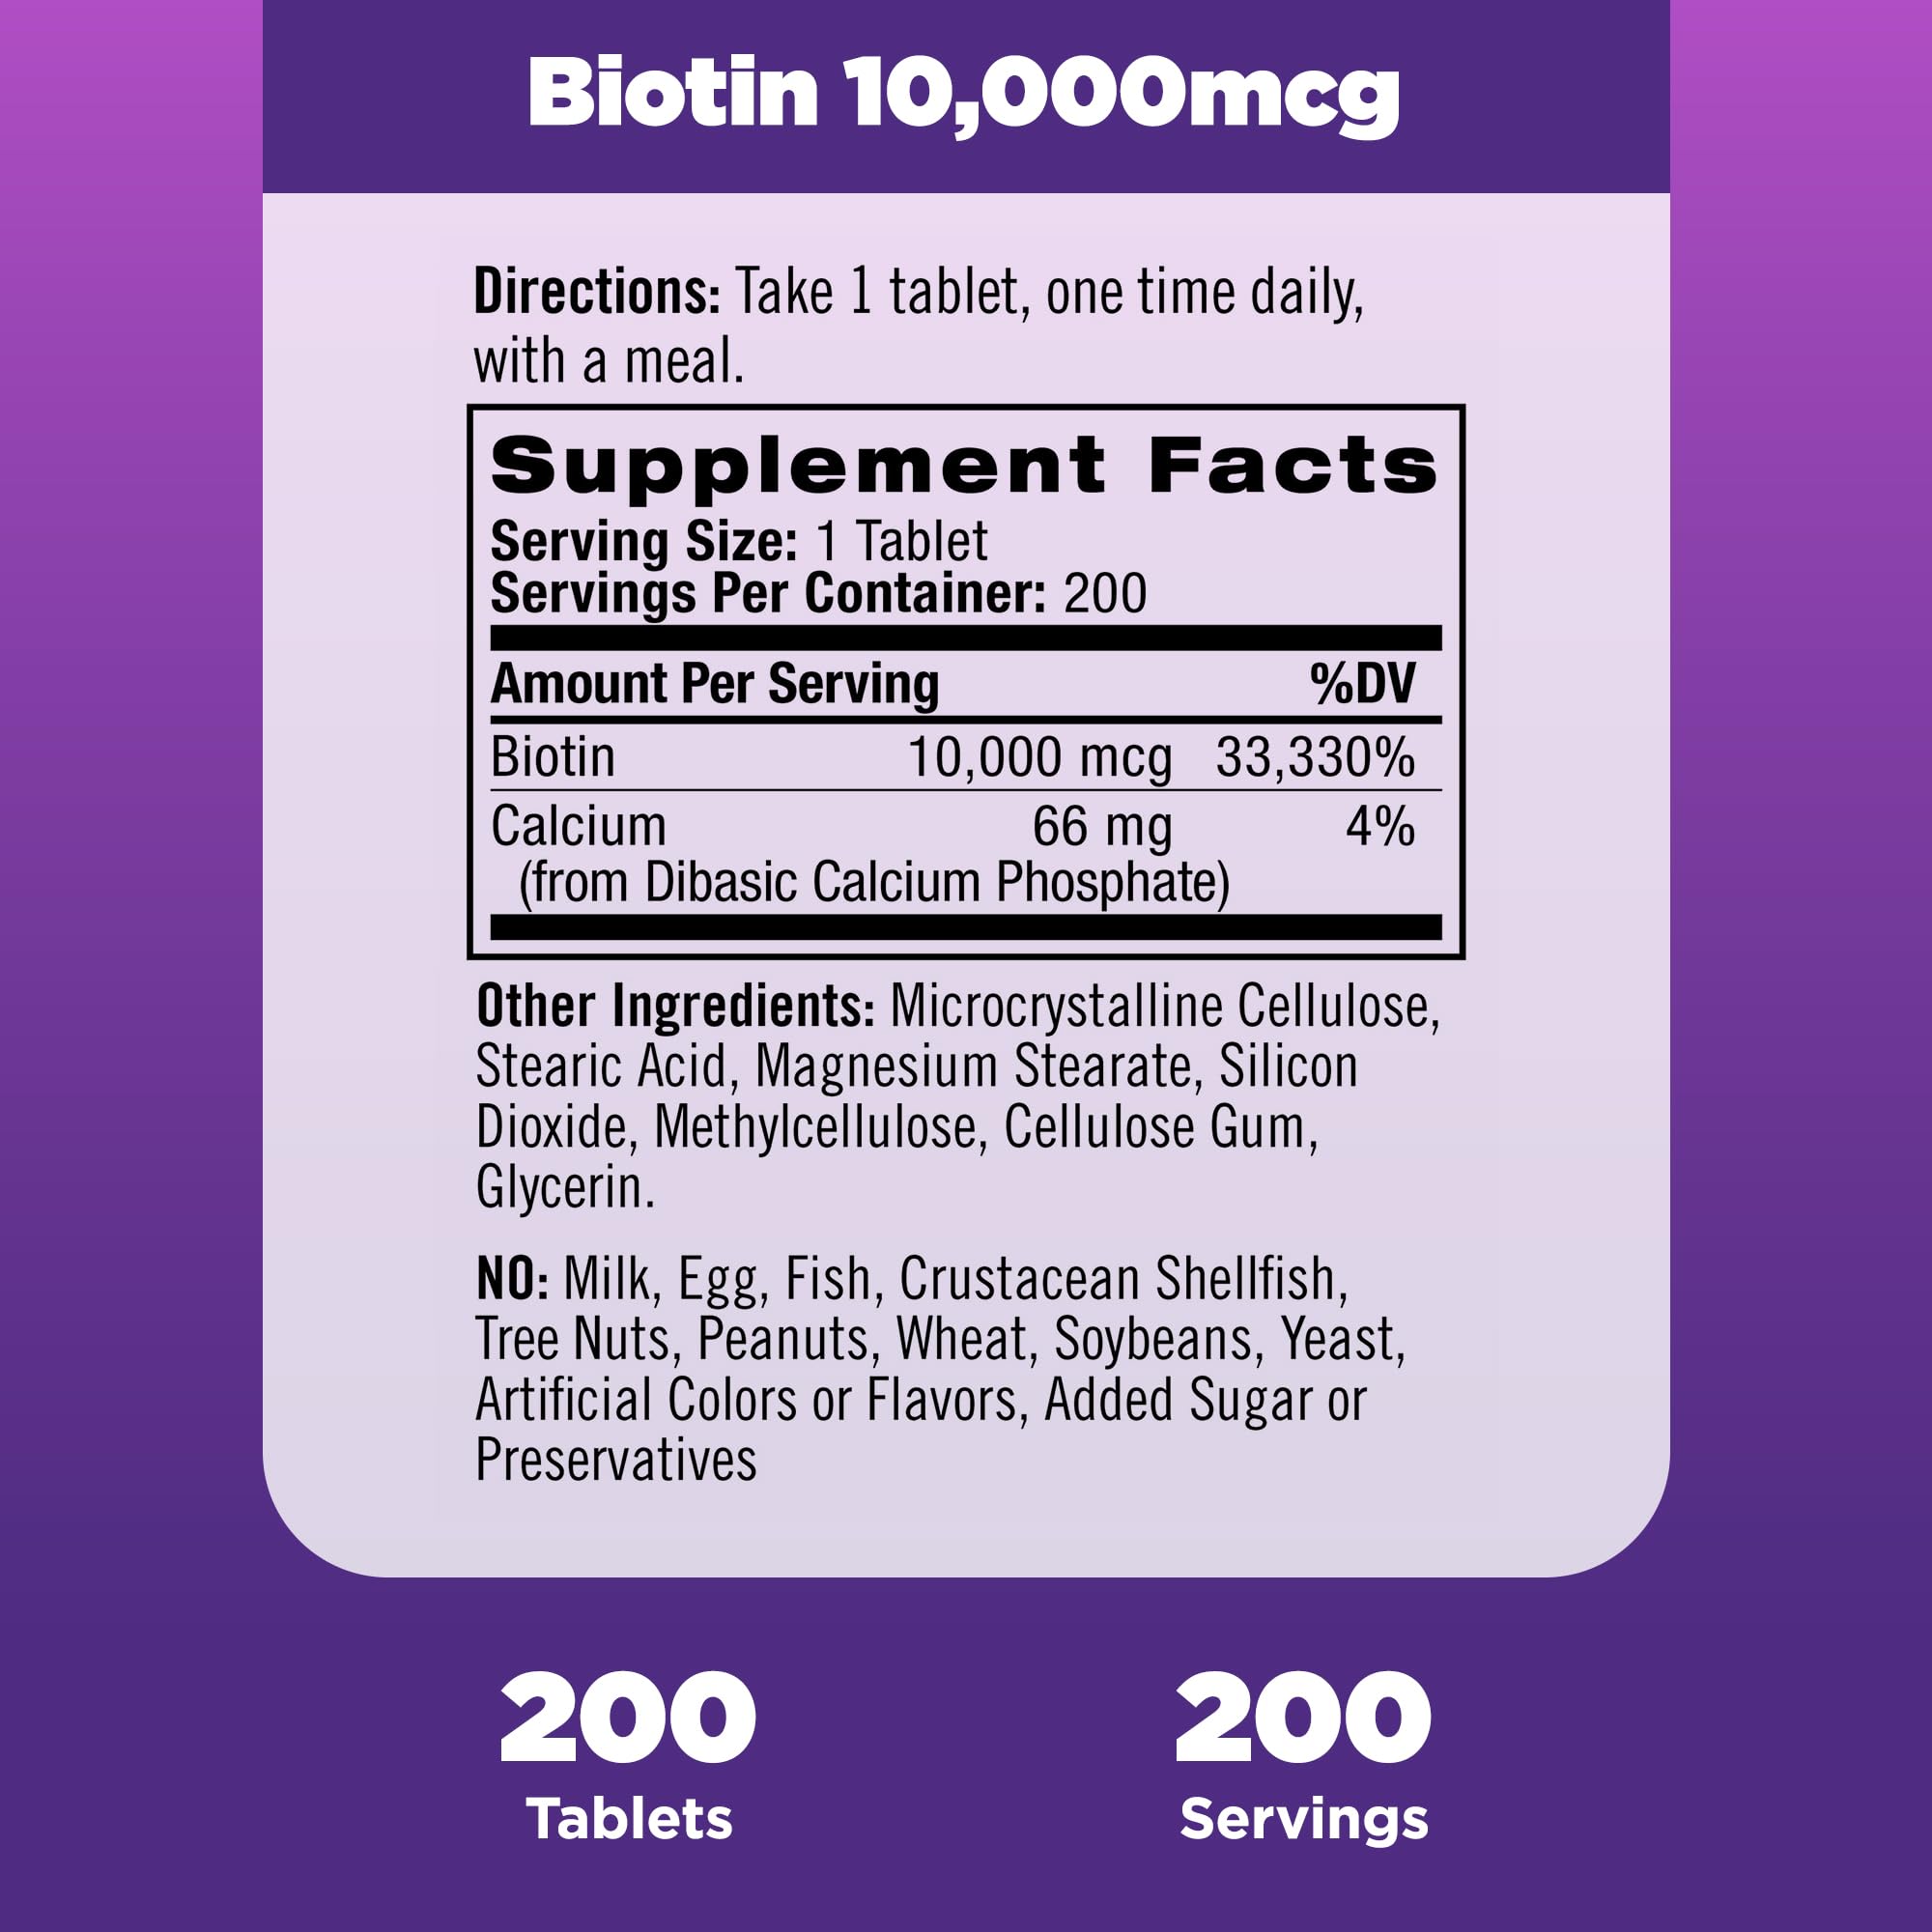 Natrol Beauty Biotin 10000mcg, Dietary Supplement for Healthy Hair, Skin, Nails and Energy Metabolism, 200 Tablets, 200 Day Supply